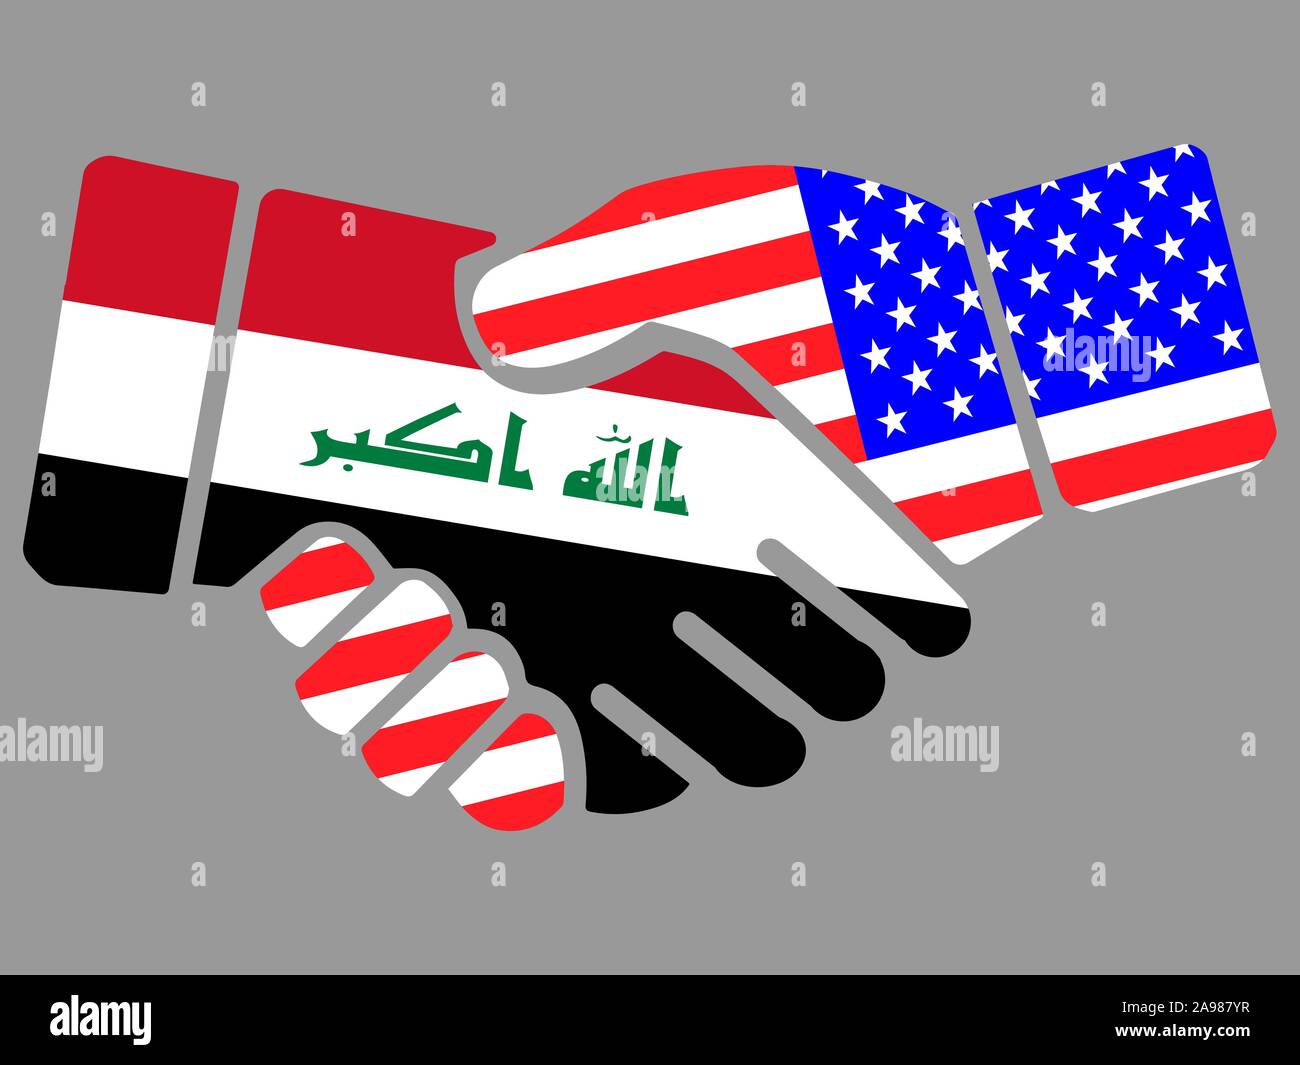 Handshake with Iraq and USA flags vector illustration eps 10. Stock Vector